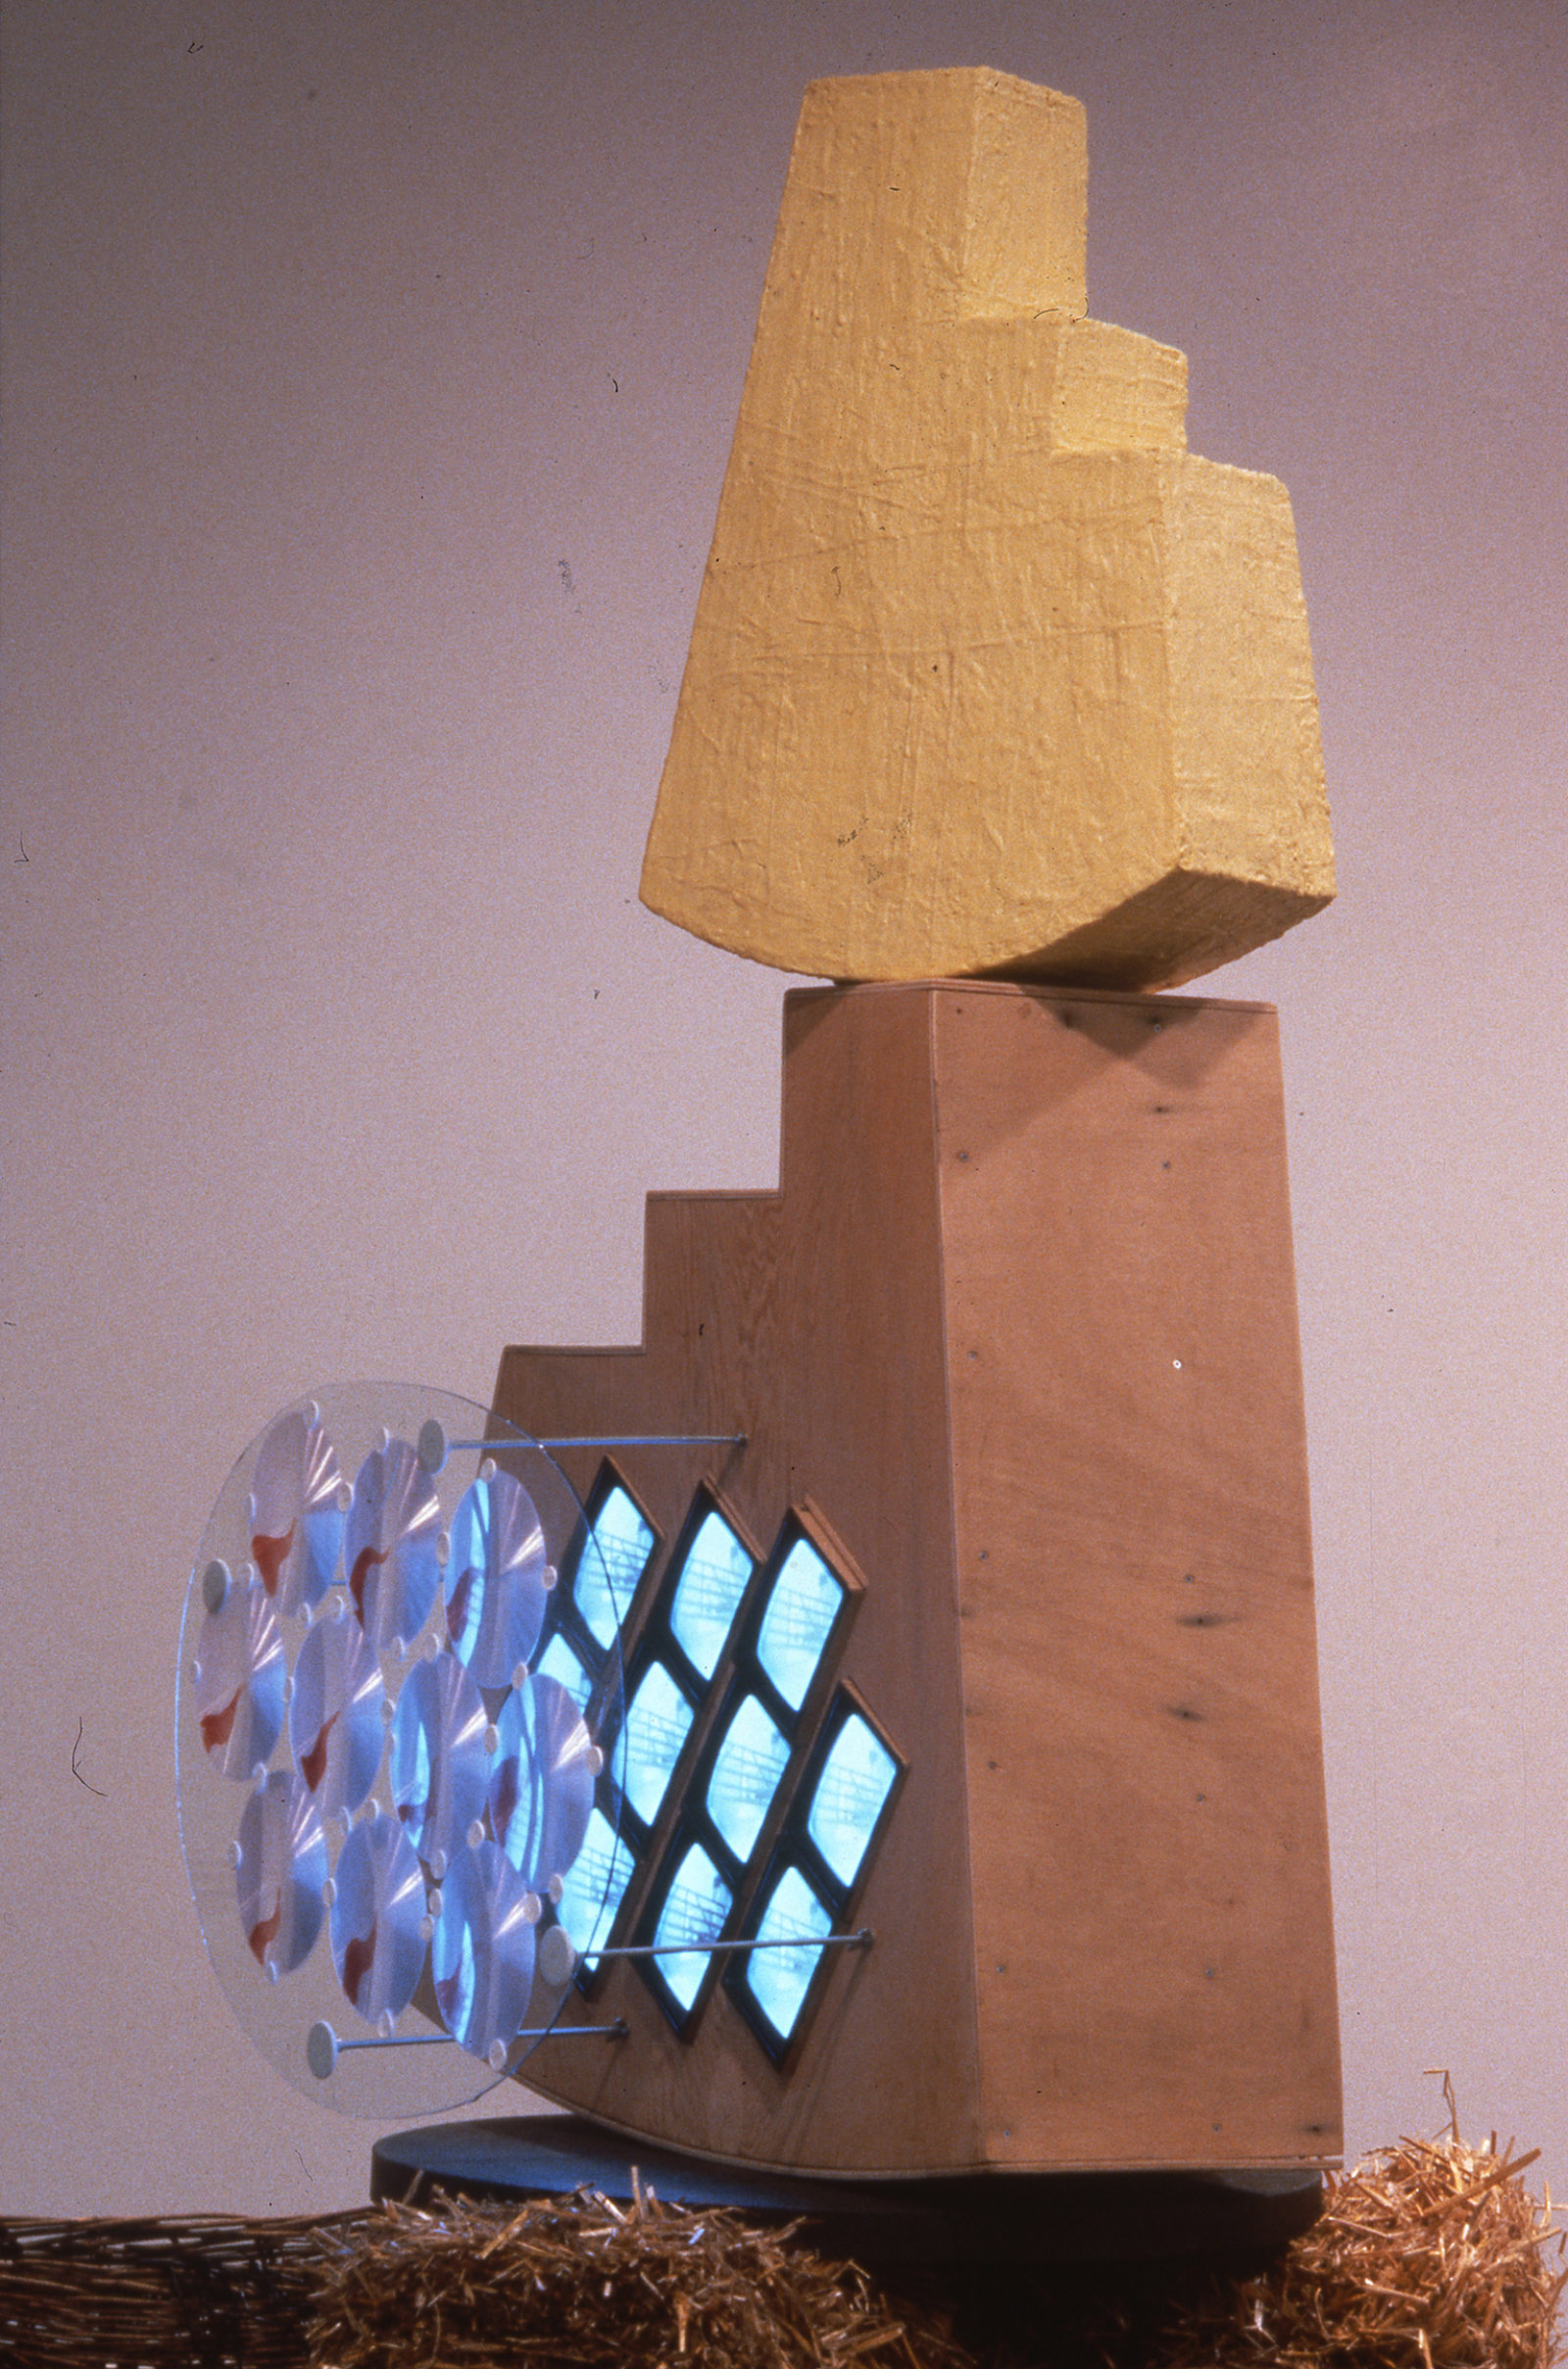 Jerry Pethick, Drawn on the Eye (detail), 1991–1994, straw bales, gate, monitors, cameras, wood, enamelled steel, sulphur, lenses, pail, basket, transformers, 156 x 360 x 132 in. (396 x 914 x 335 cm)